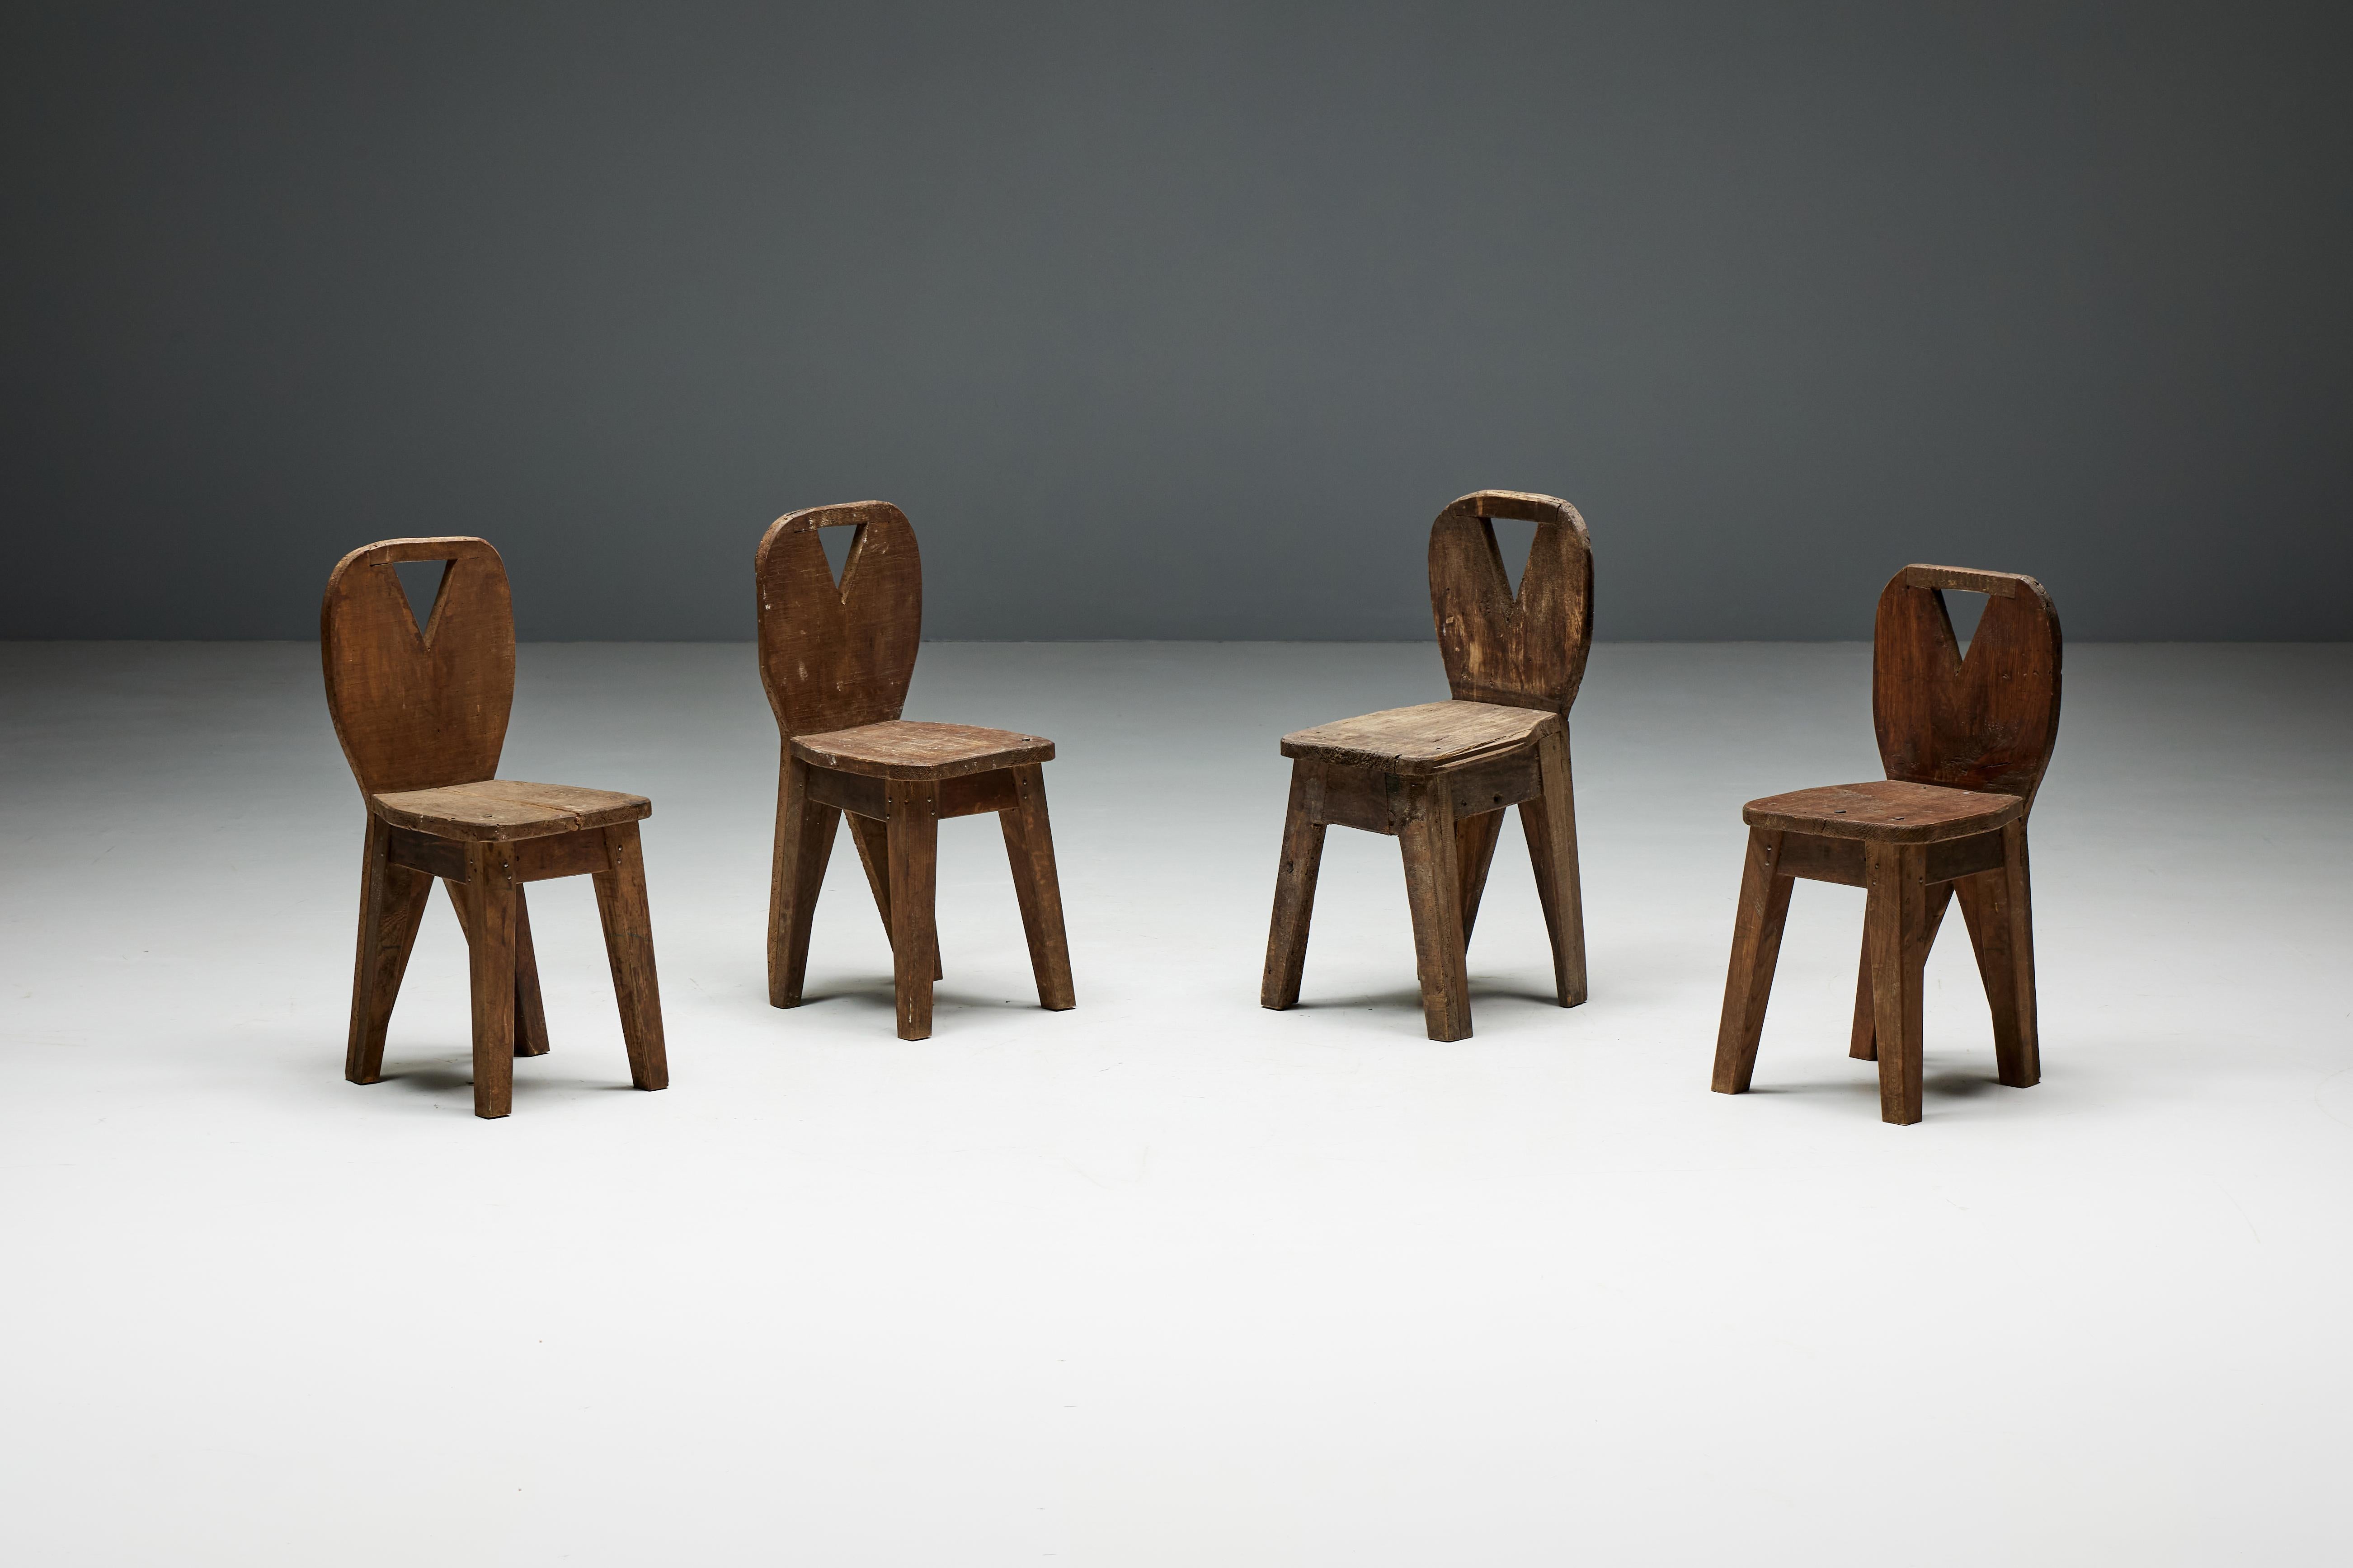 Set of four brutalist mountain chairs, made of solid wood and steeped in the rich history of Auvergne, France, in the 1950s. The sturdy construction of these chairs attests not only to their durability but also to the artisanal mastery that